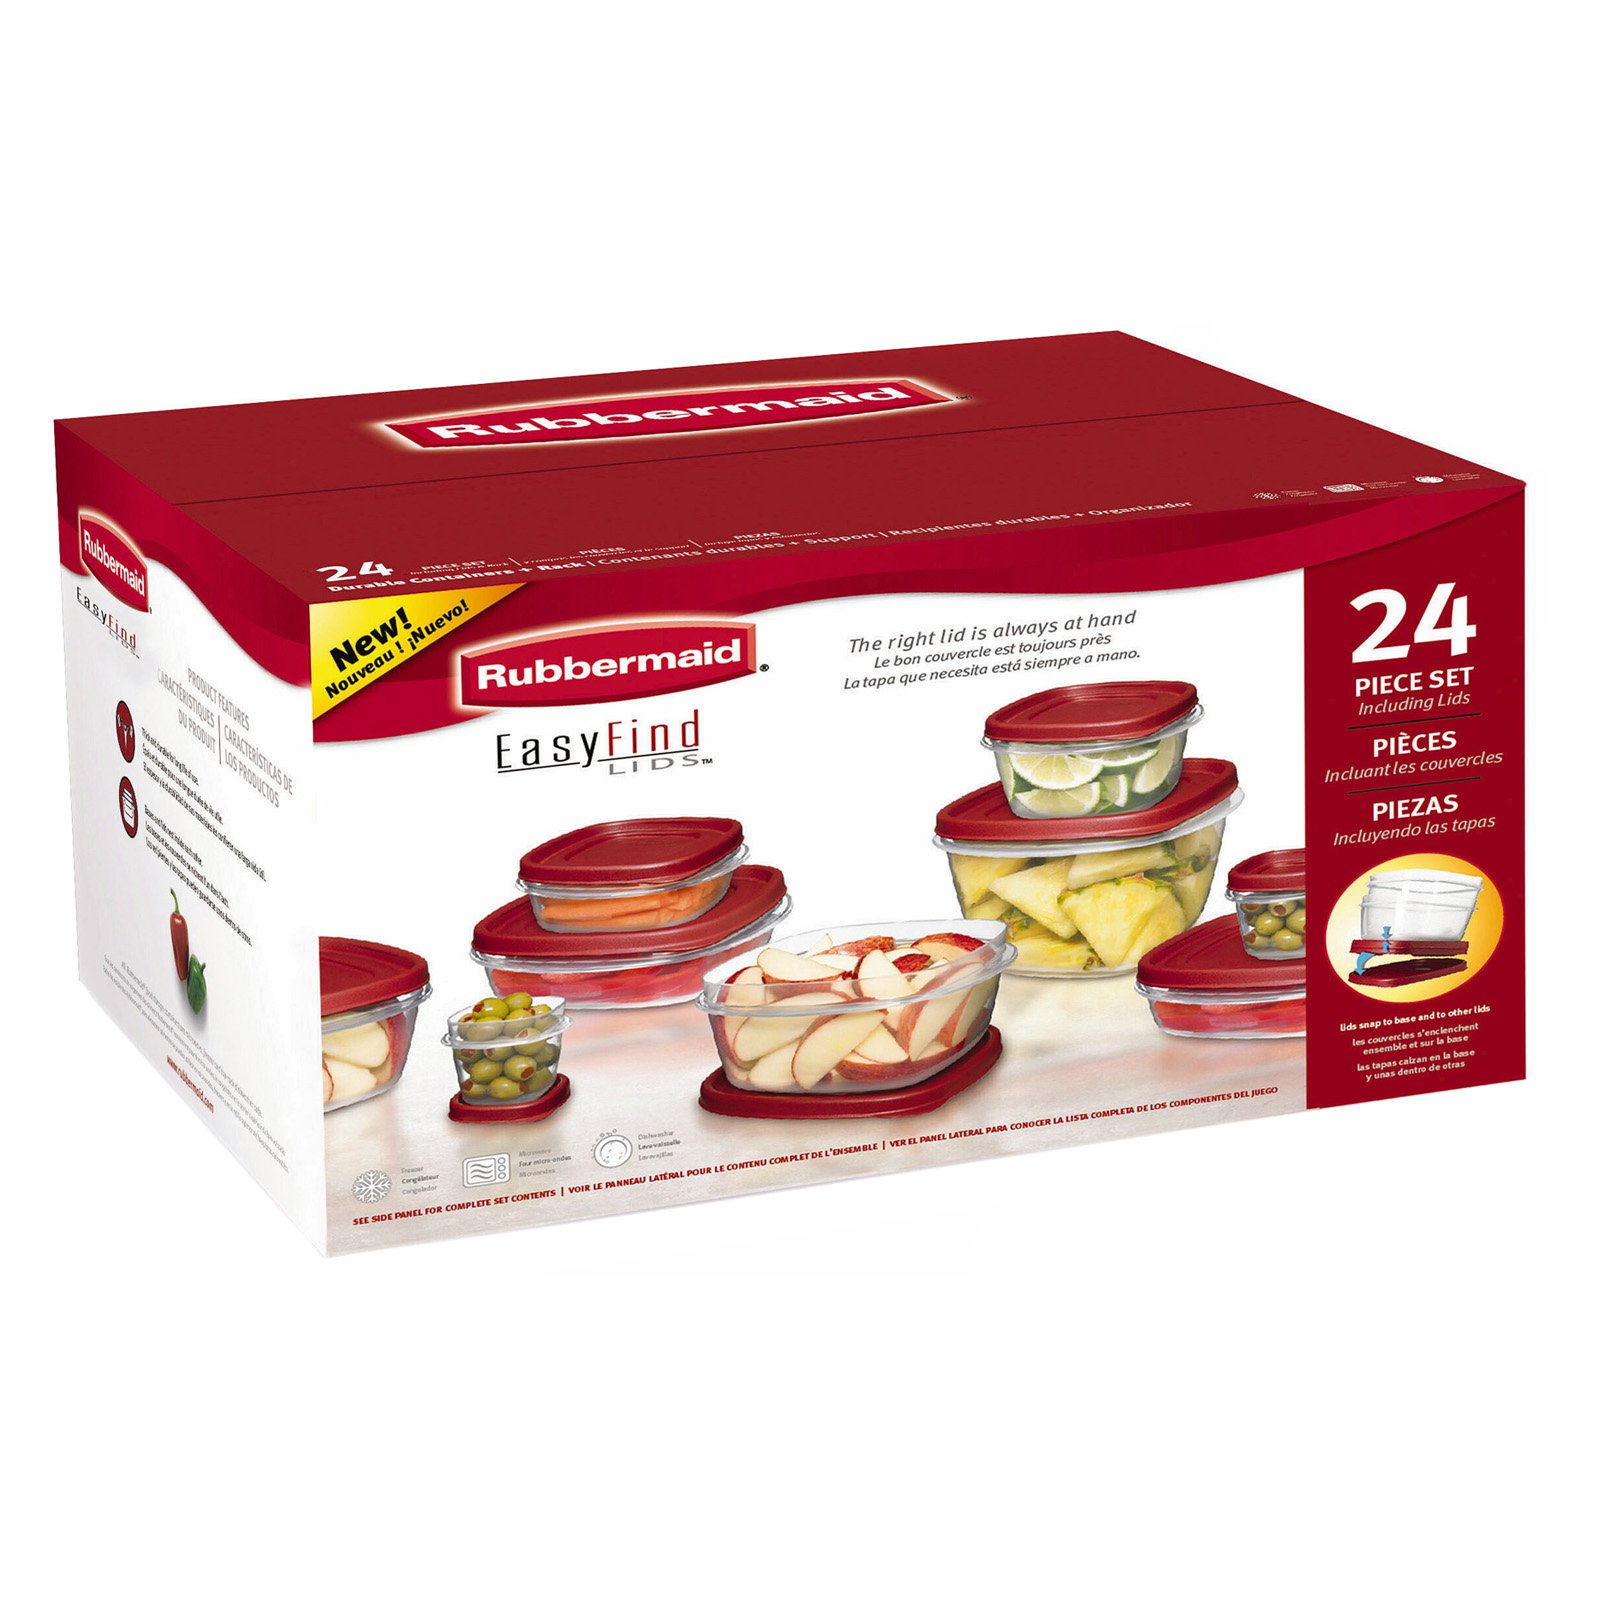 EASYLID 24PC SET RED - image 1 of 3